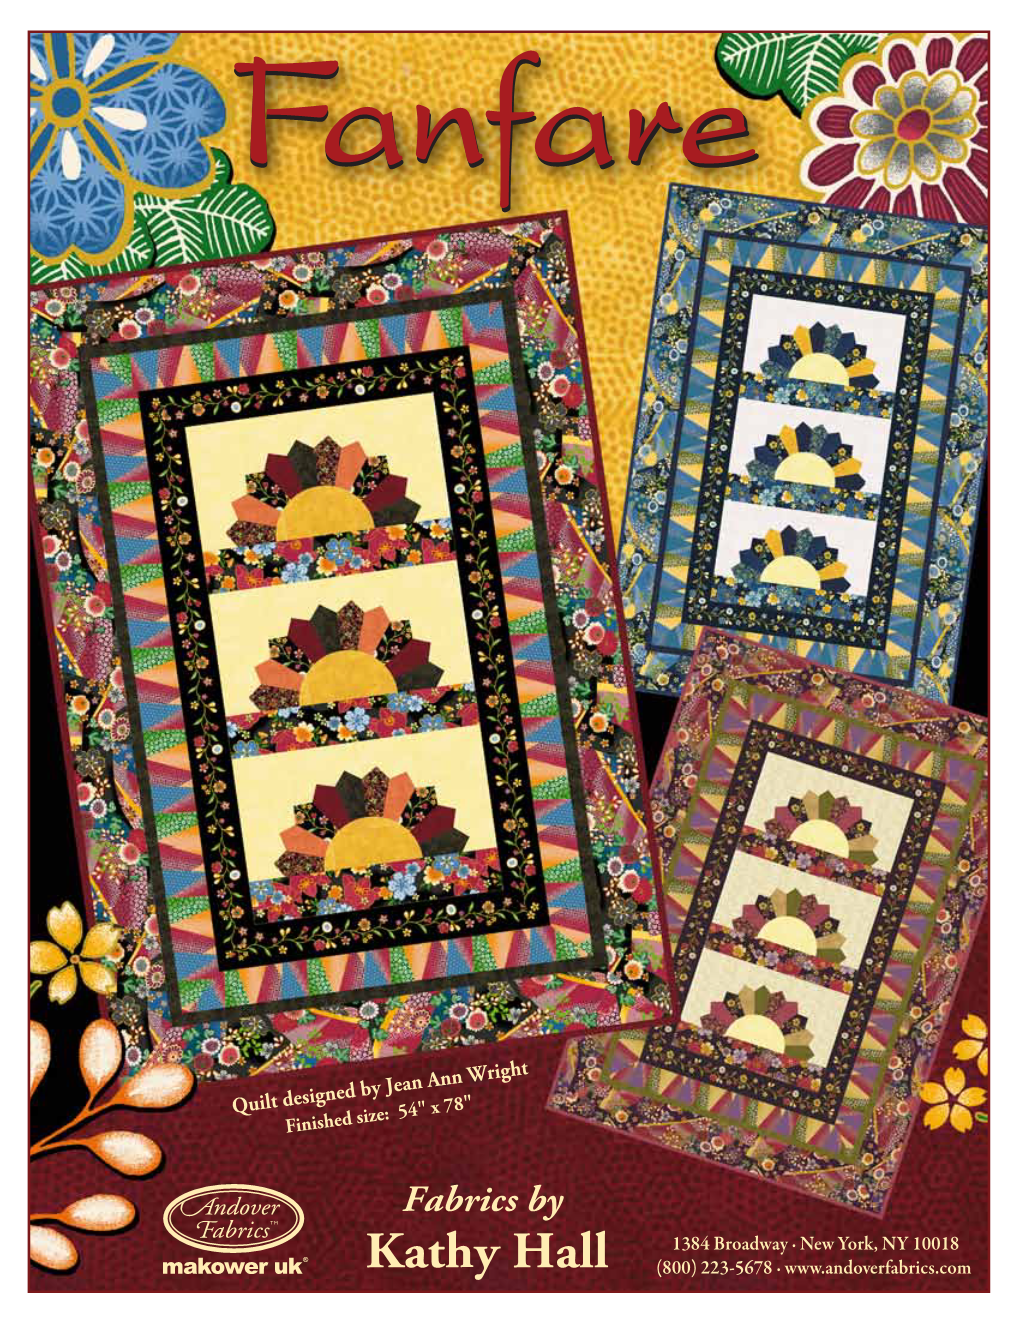 Kathy Hall (800) 223-5678 · Fanfare Quilt Introducing Andover Fabrics New Collection: Fanfare by Kathy Hall Quilt Designed by Jean Ann Wright